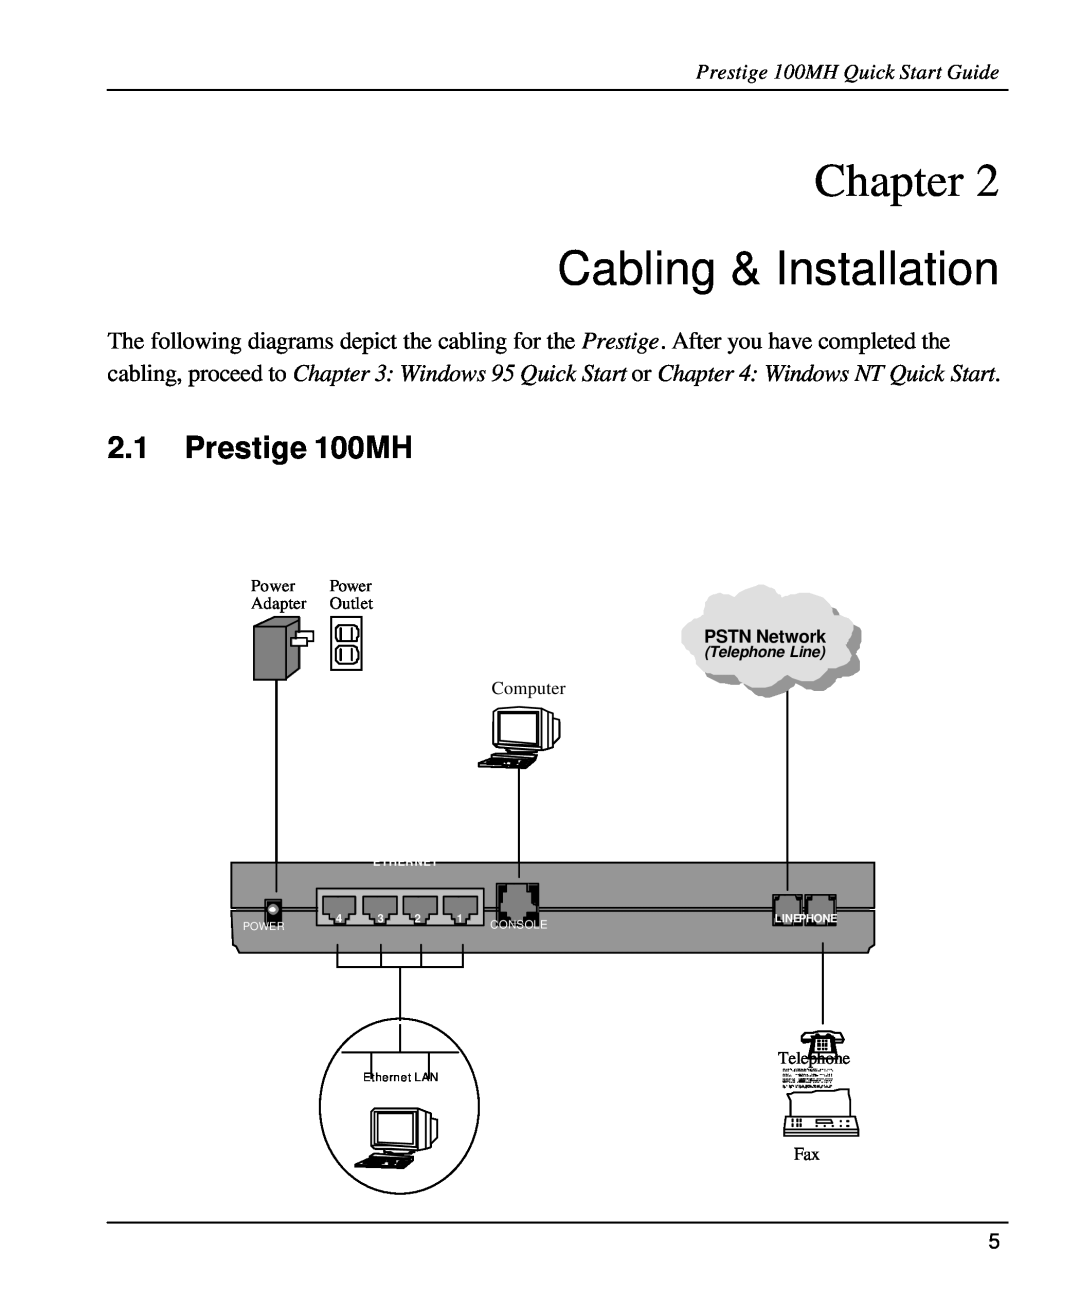 ZyXEL Communications Cabling & Installation, Chapter, Prestige 100MH Quick Start Guide, Power Power Adapter Outlet 